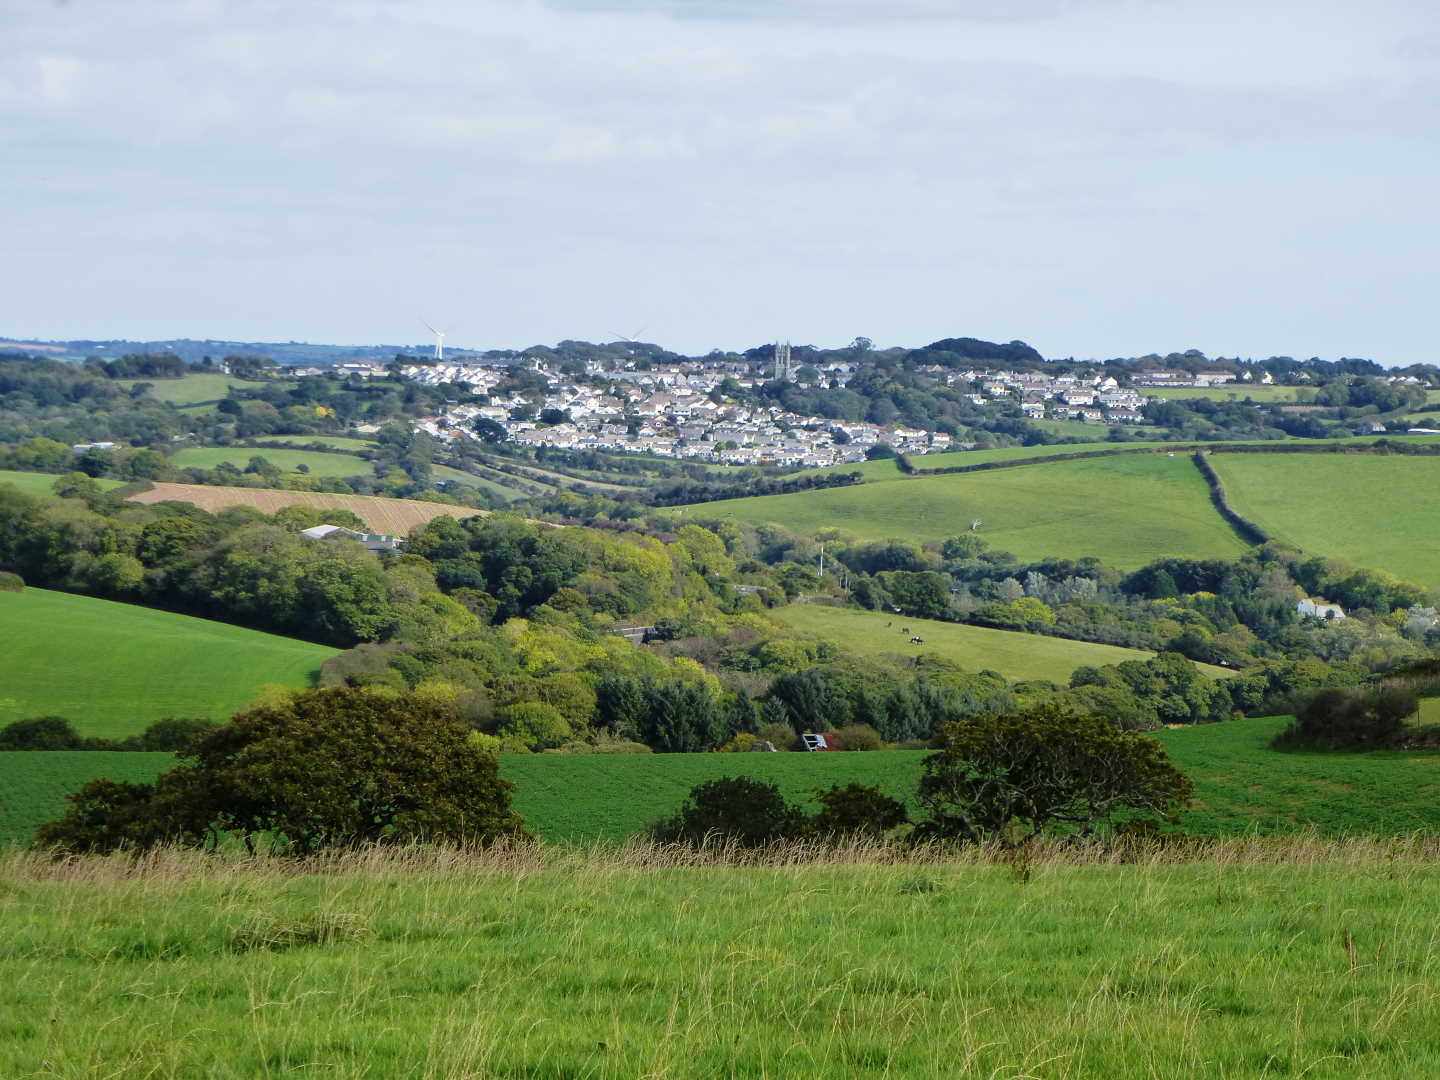 A view of Probus village